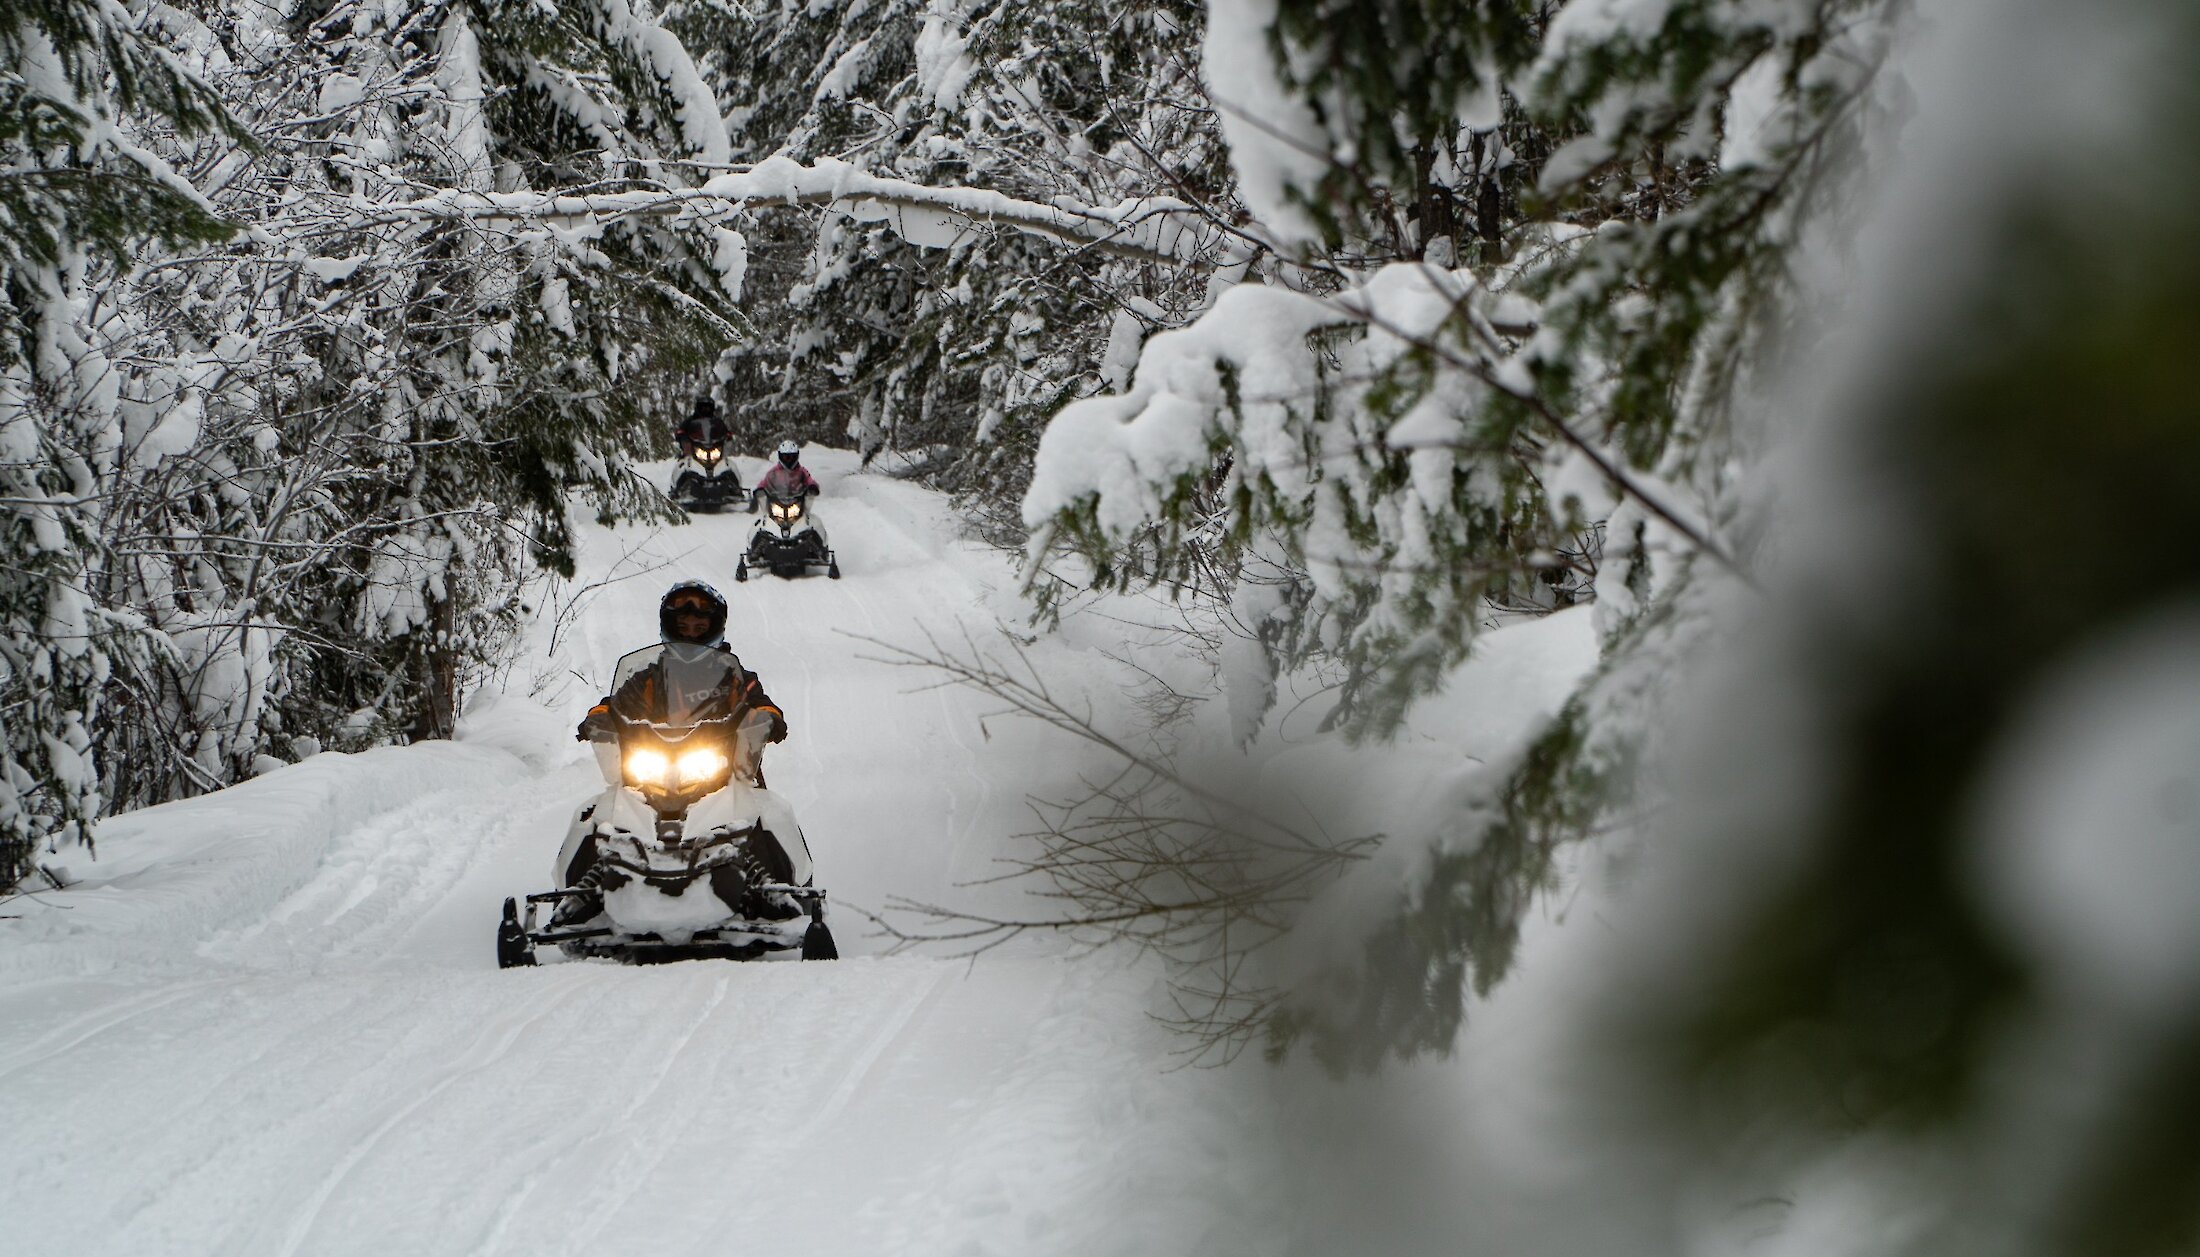 Treelined snowmobiling trails winding through the mountain at Kicking Horse